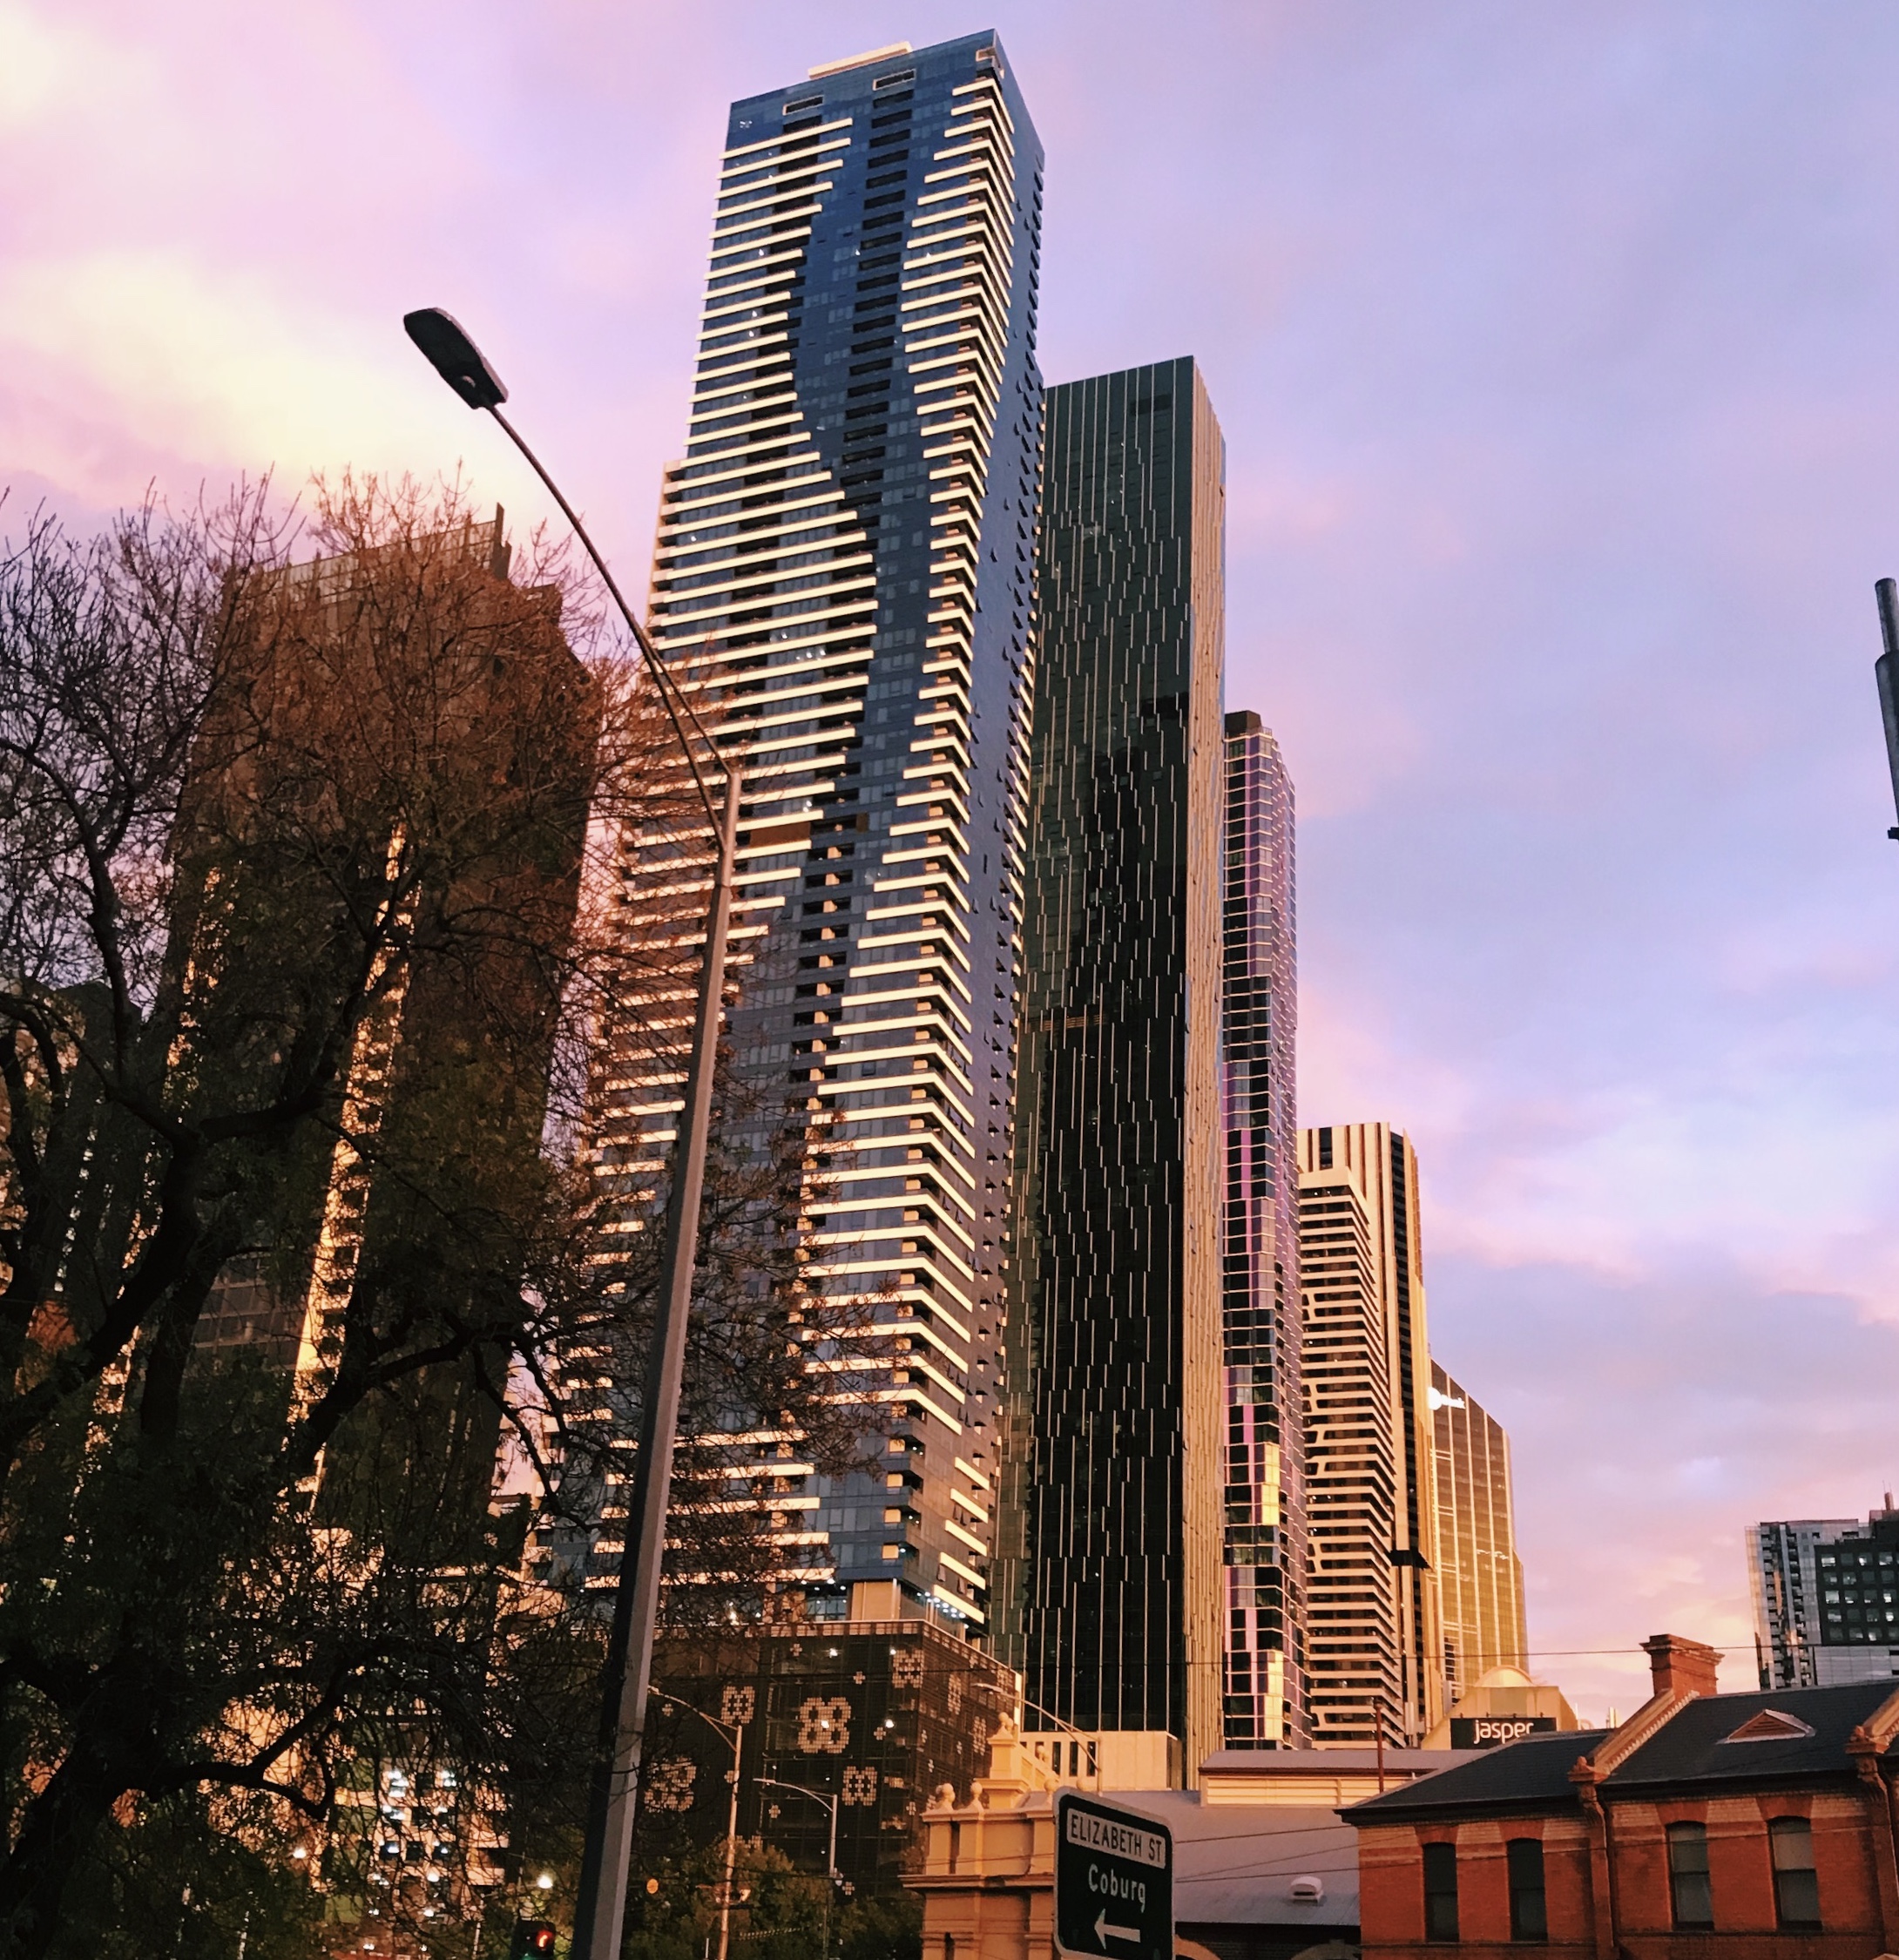 Melbourne In 48 Hours: A 20-Something's Travel Guide